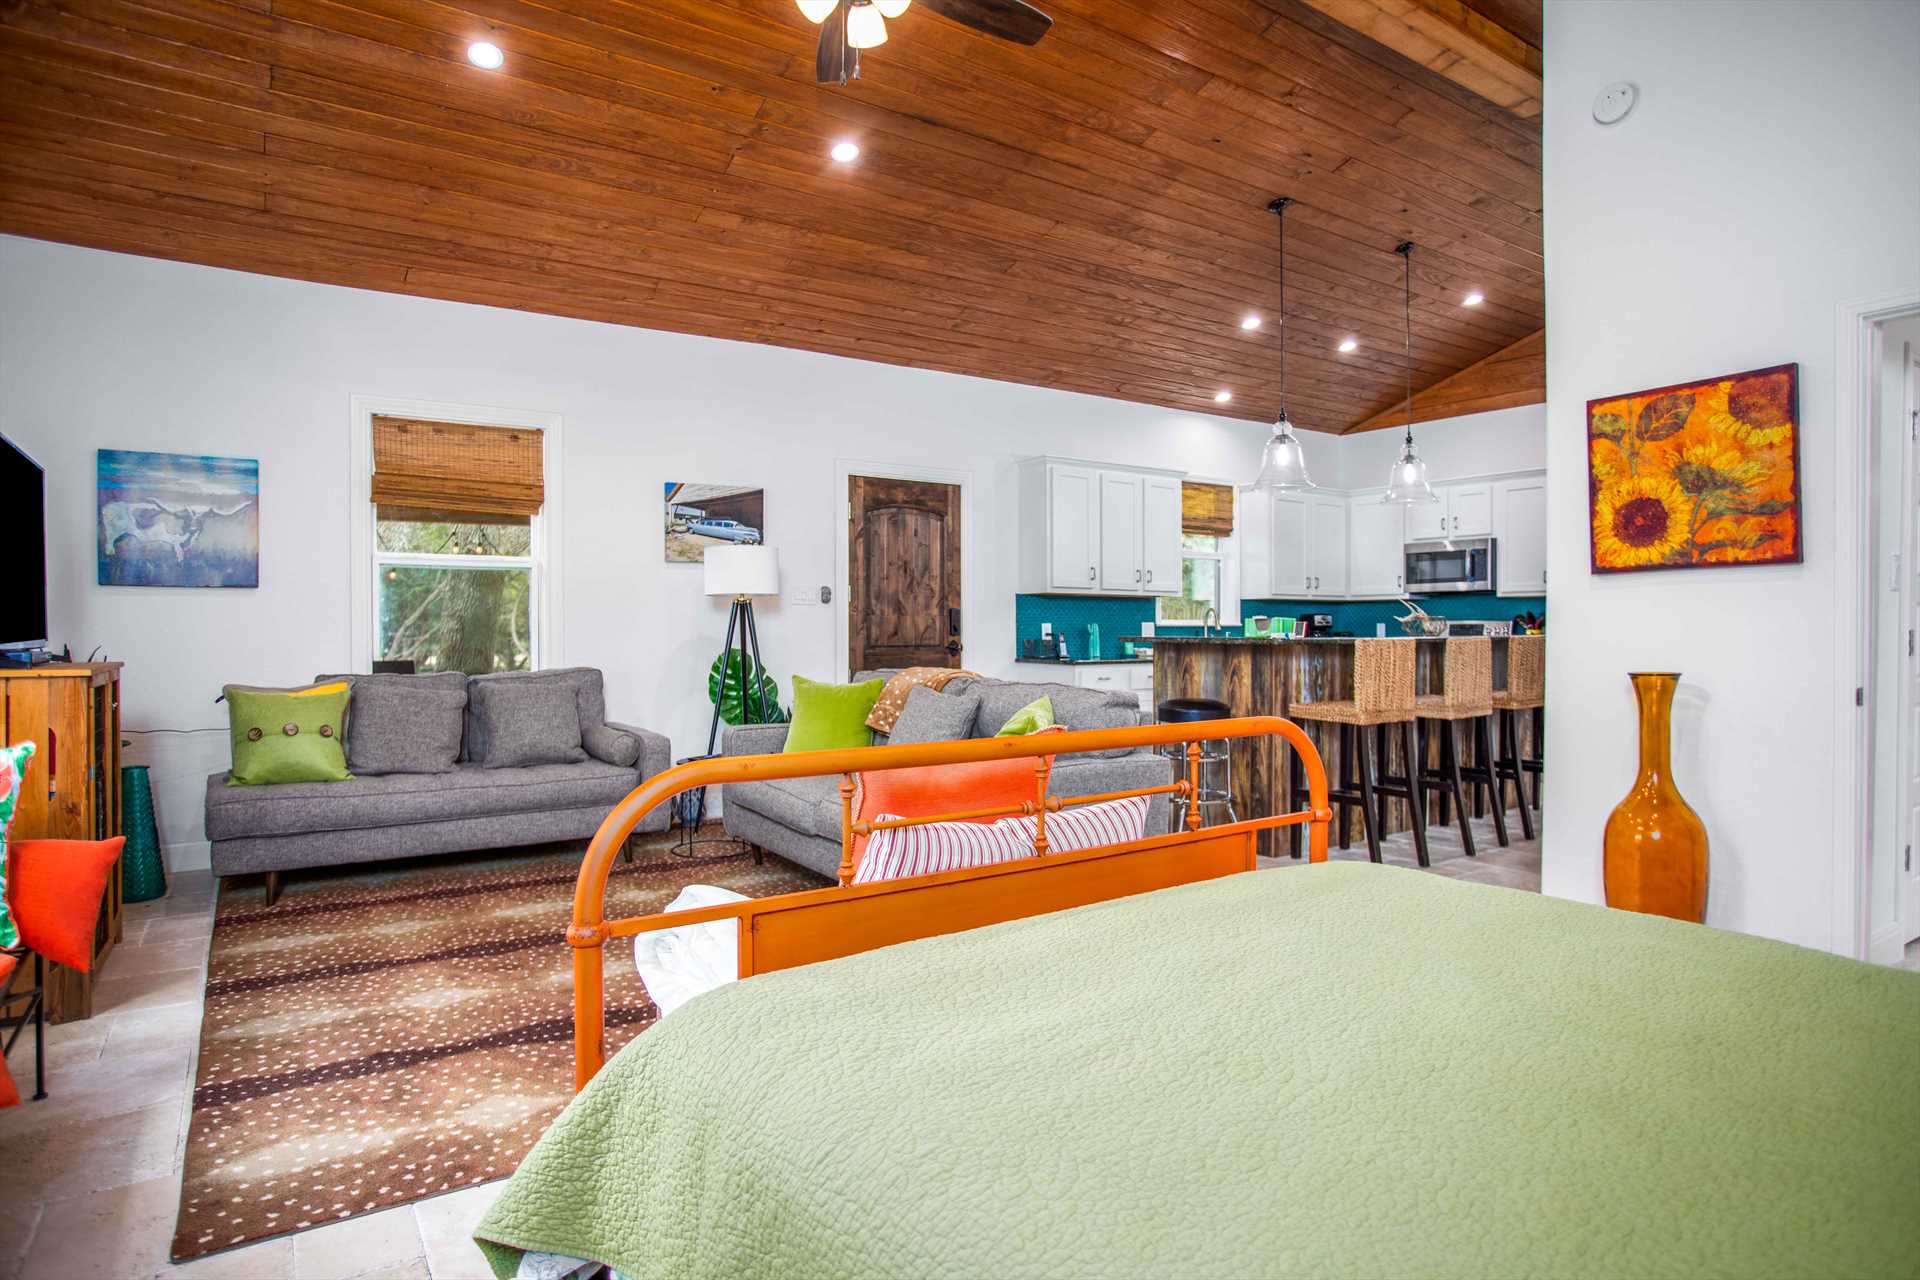                                                 Beautiful woodwork, colorful furnishings, and a wide-open floor plan all help to create the friendly vibe at the Great Escape!